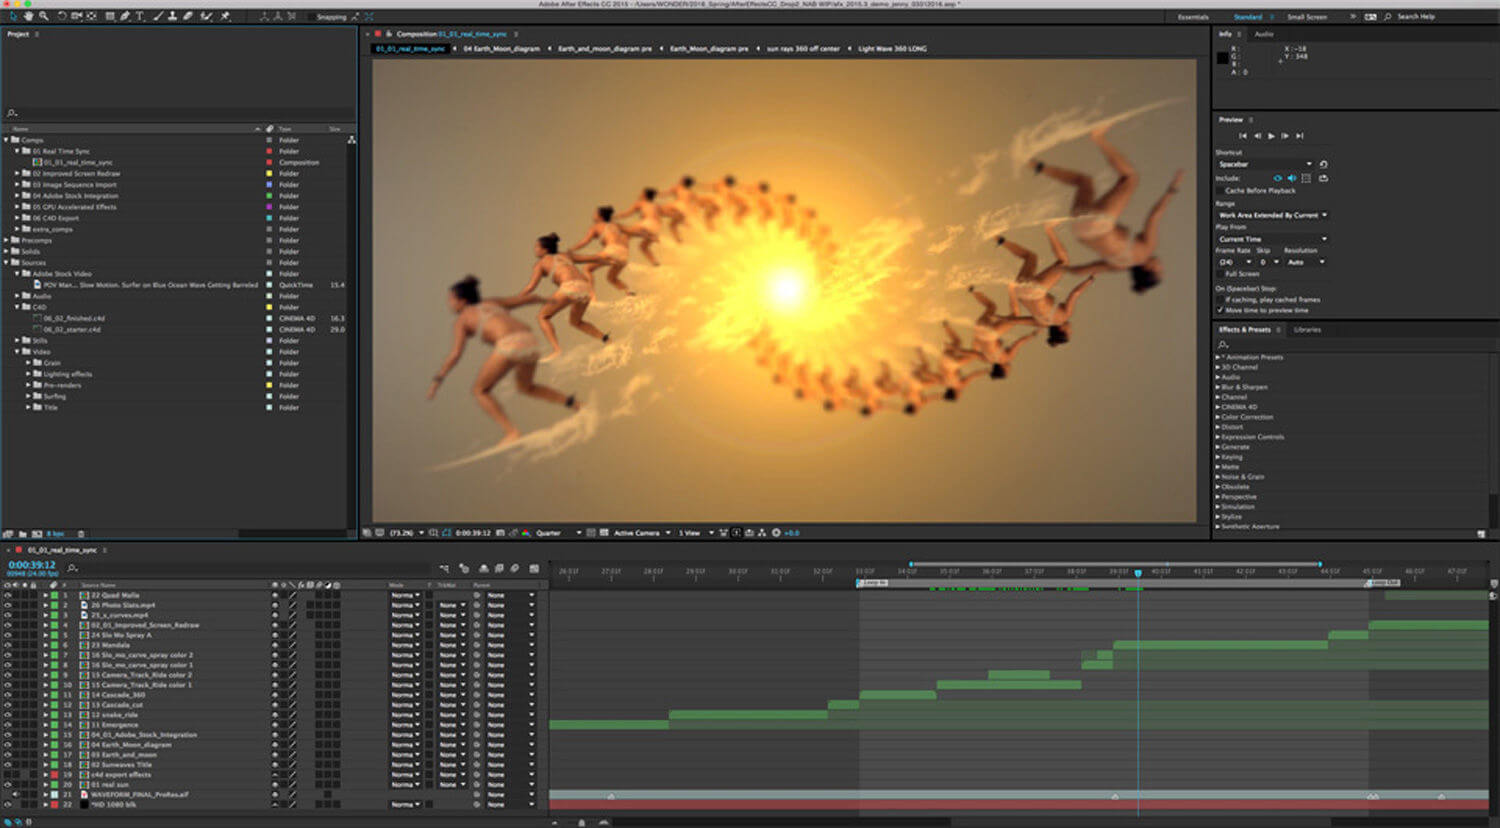 Adobe After Effects cc 2020 Crack patch